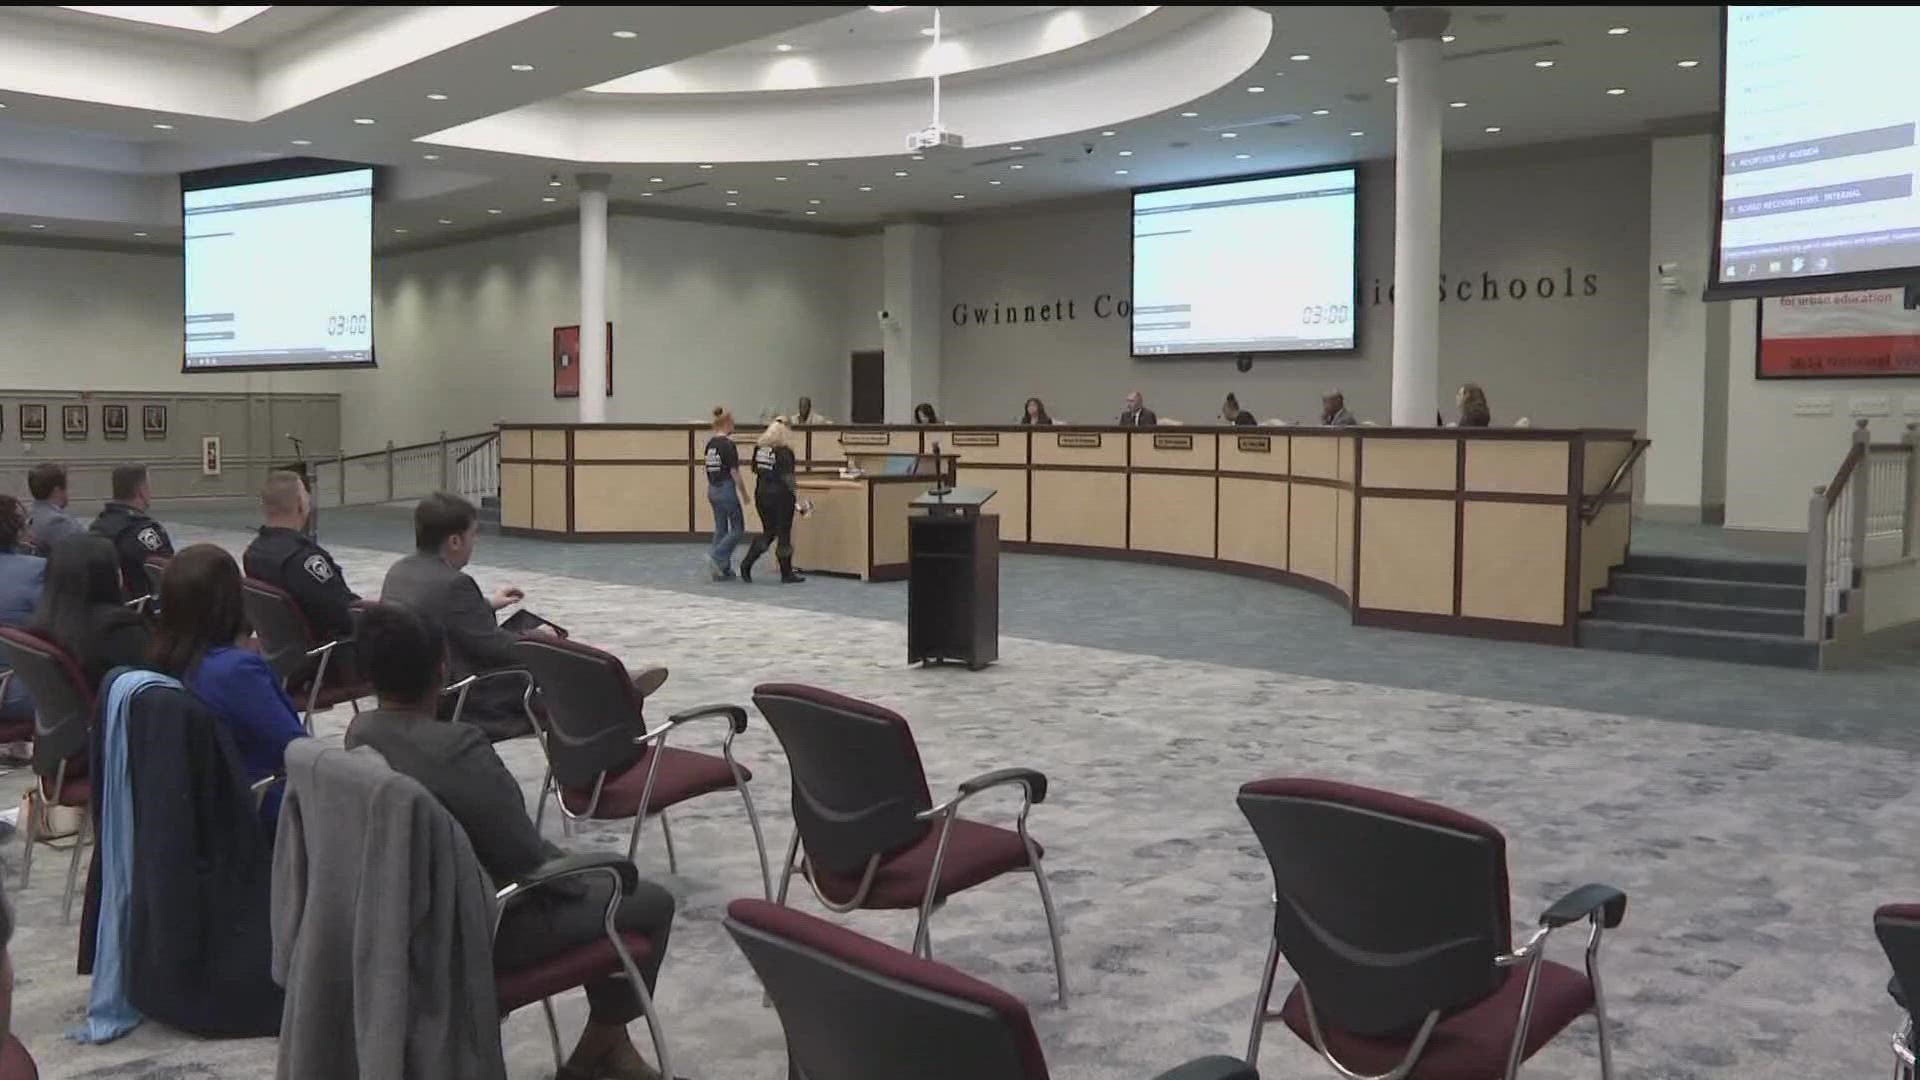 Parents and now some school board members in Gwinnett County are angry and frustrated over the new numbers showing increases in violent incidents in the schools.